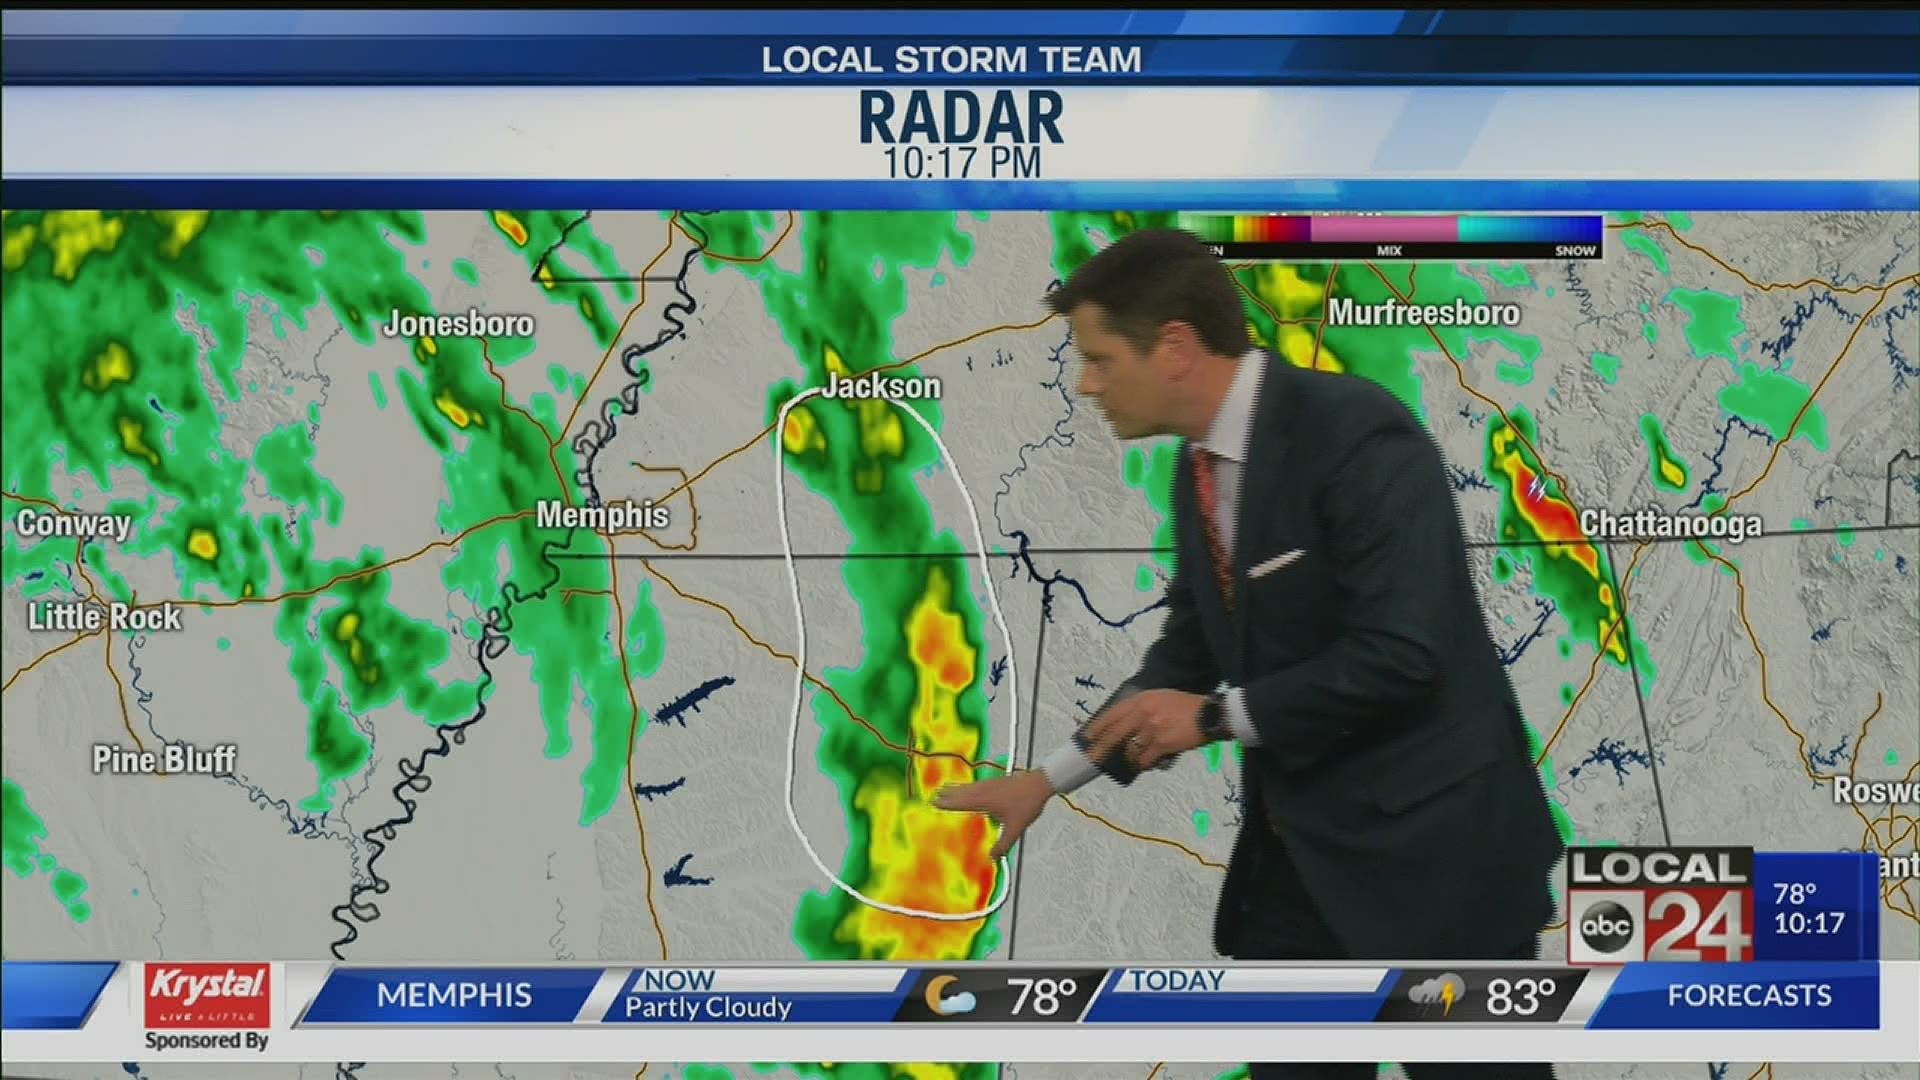 Gusty winds, heavy rain, and tornadoes possible